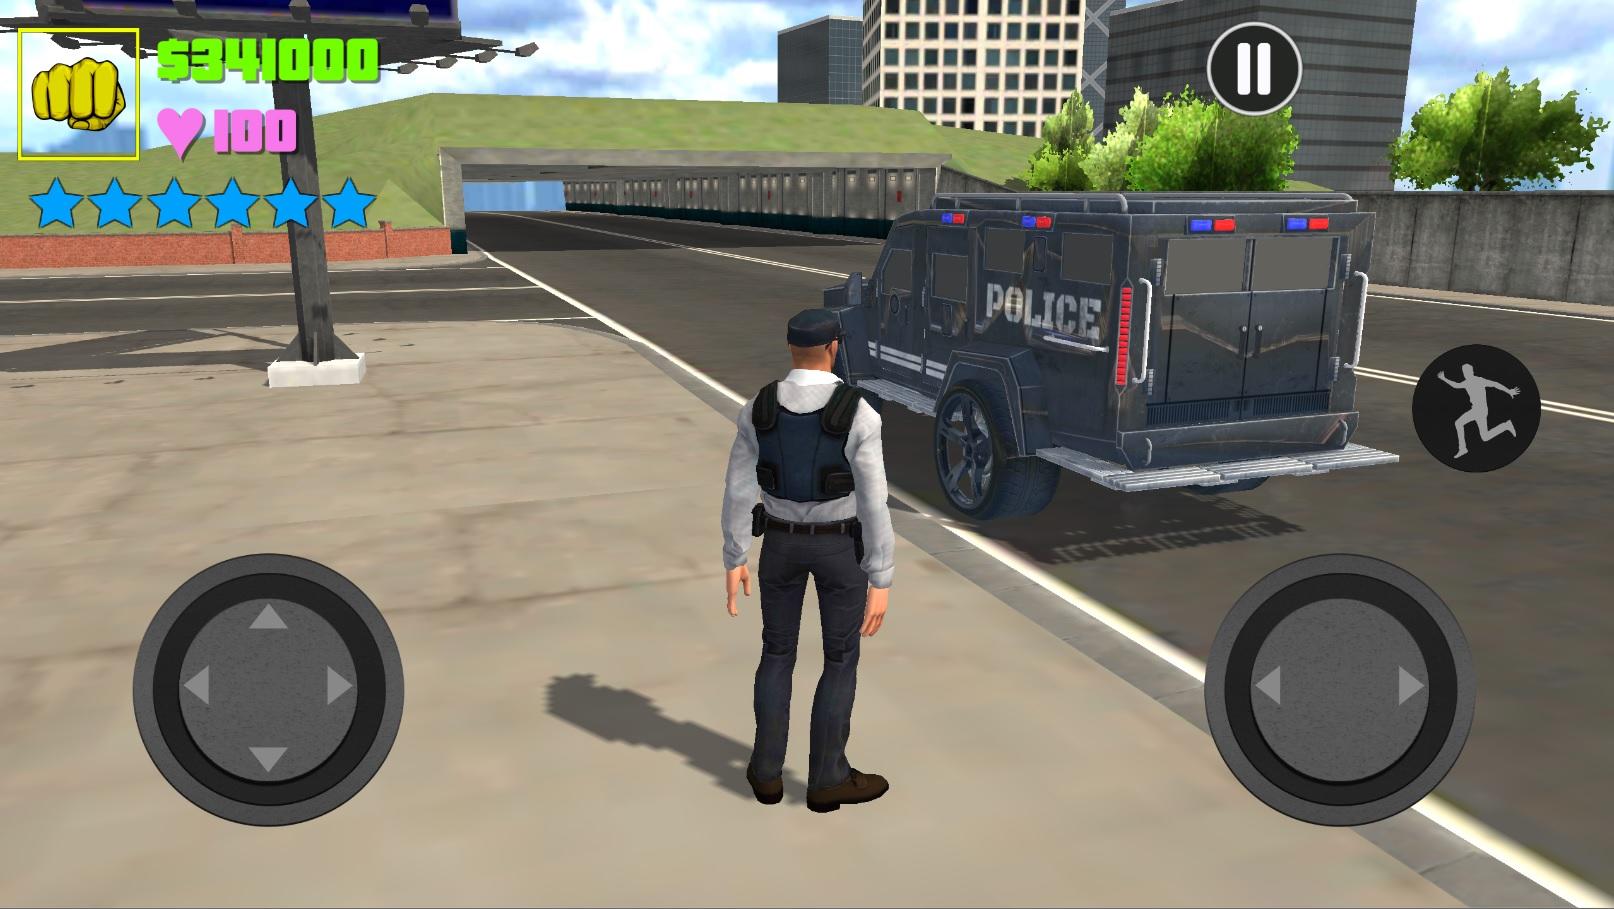 Screenshot 1 of US Armored Police Truck Drive: Jeux de voitures 2021 